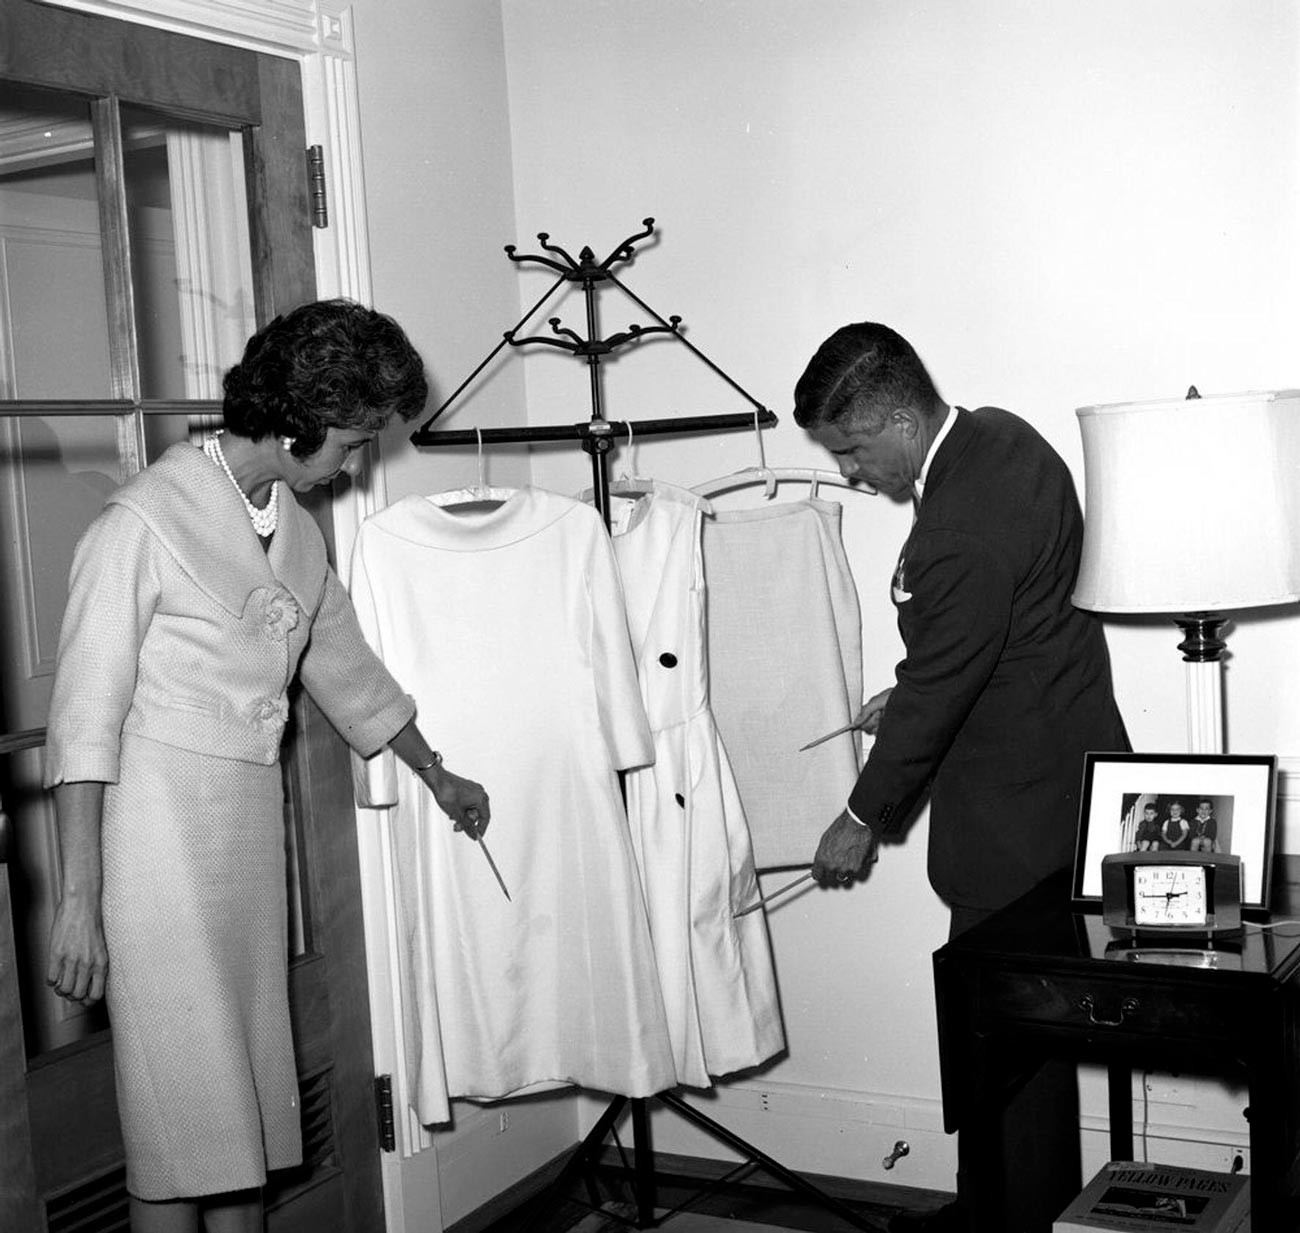 Several gowns designed by Oleg Cassini for Jacqueline Kennedy.